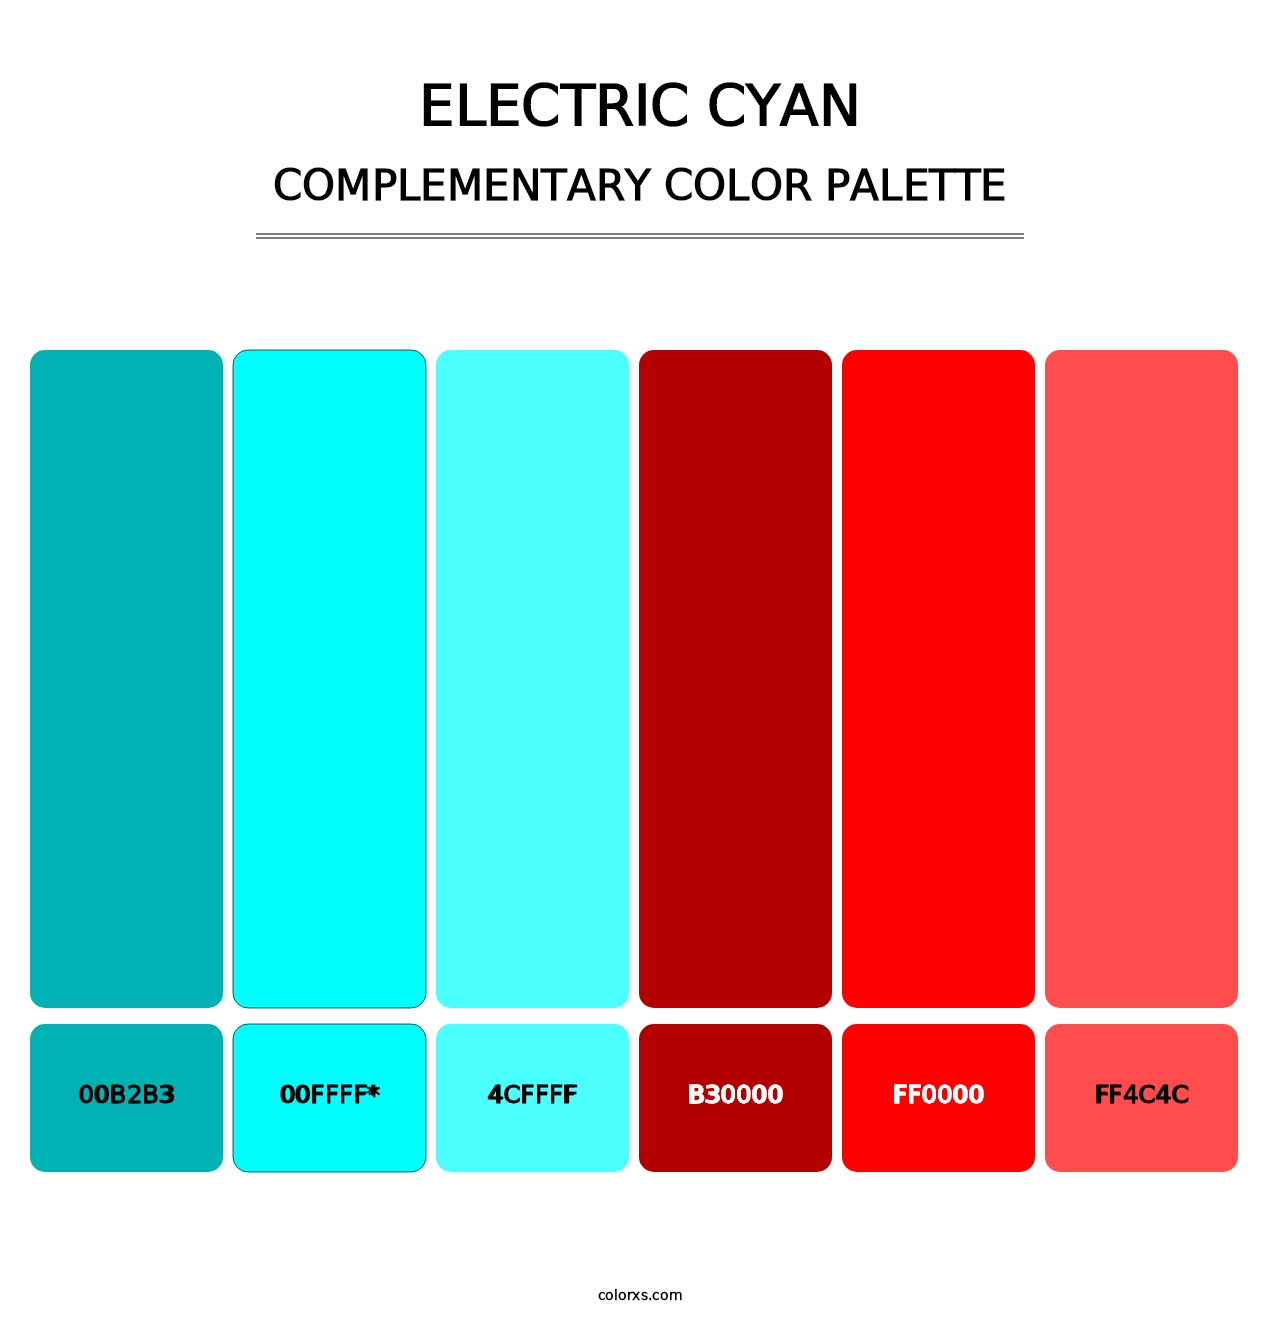 Electric Cyan - Complementary Color Palette